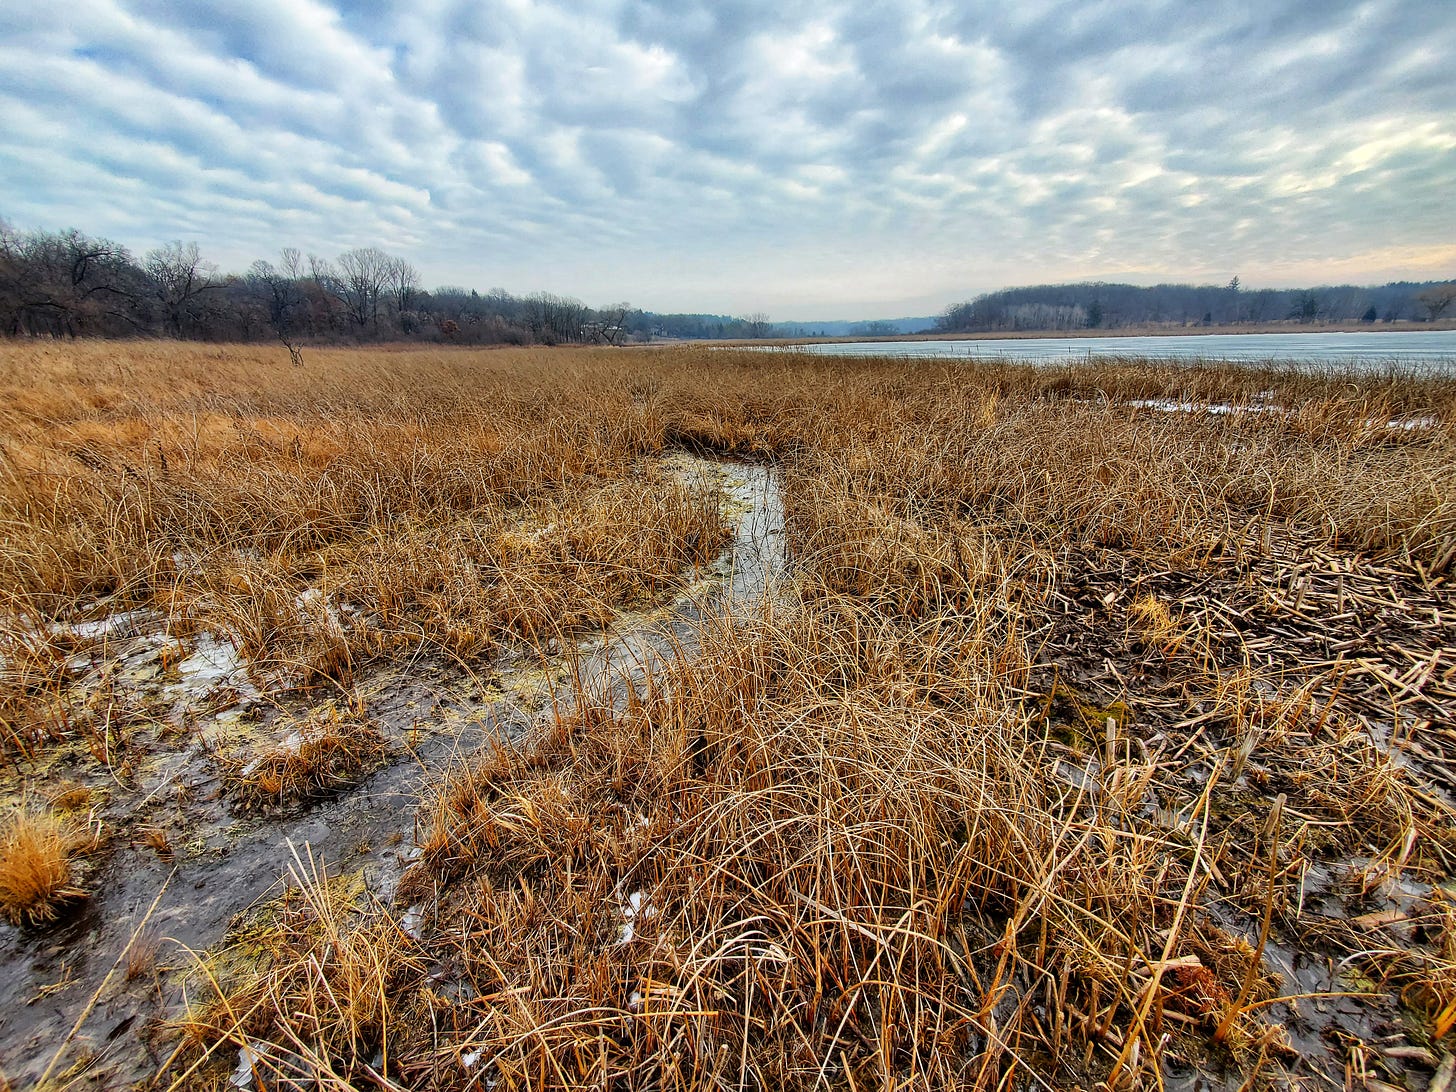 Brown, yellow, and umber grasses stretch out toward a partially frozen lake. A small, frozen channel of water flows through the middle of the marshy wetland. White clouds ripple the pastel sky above.